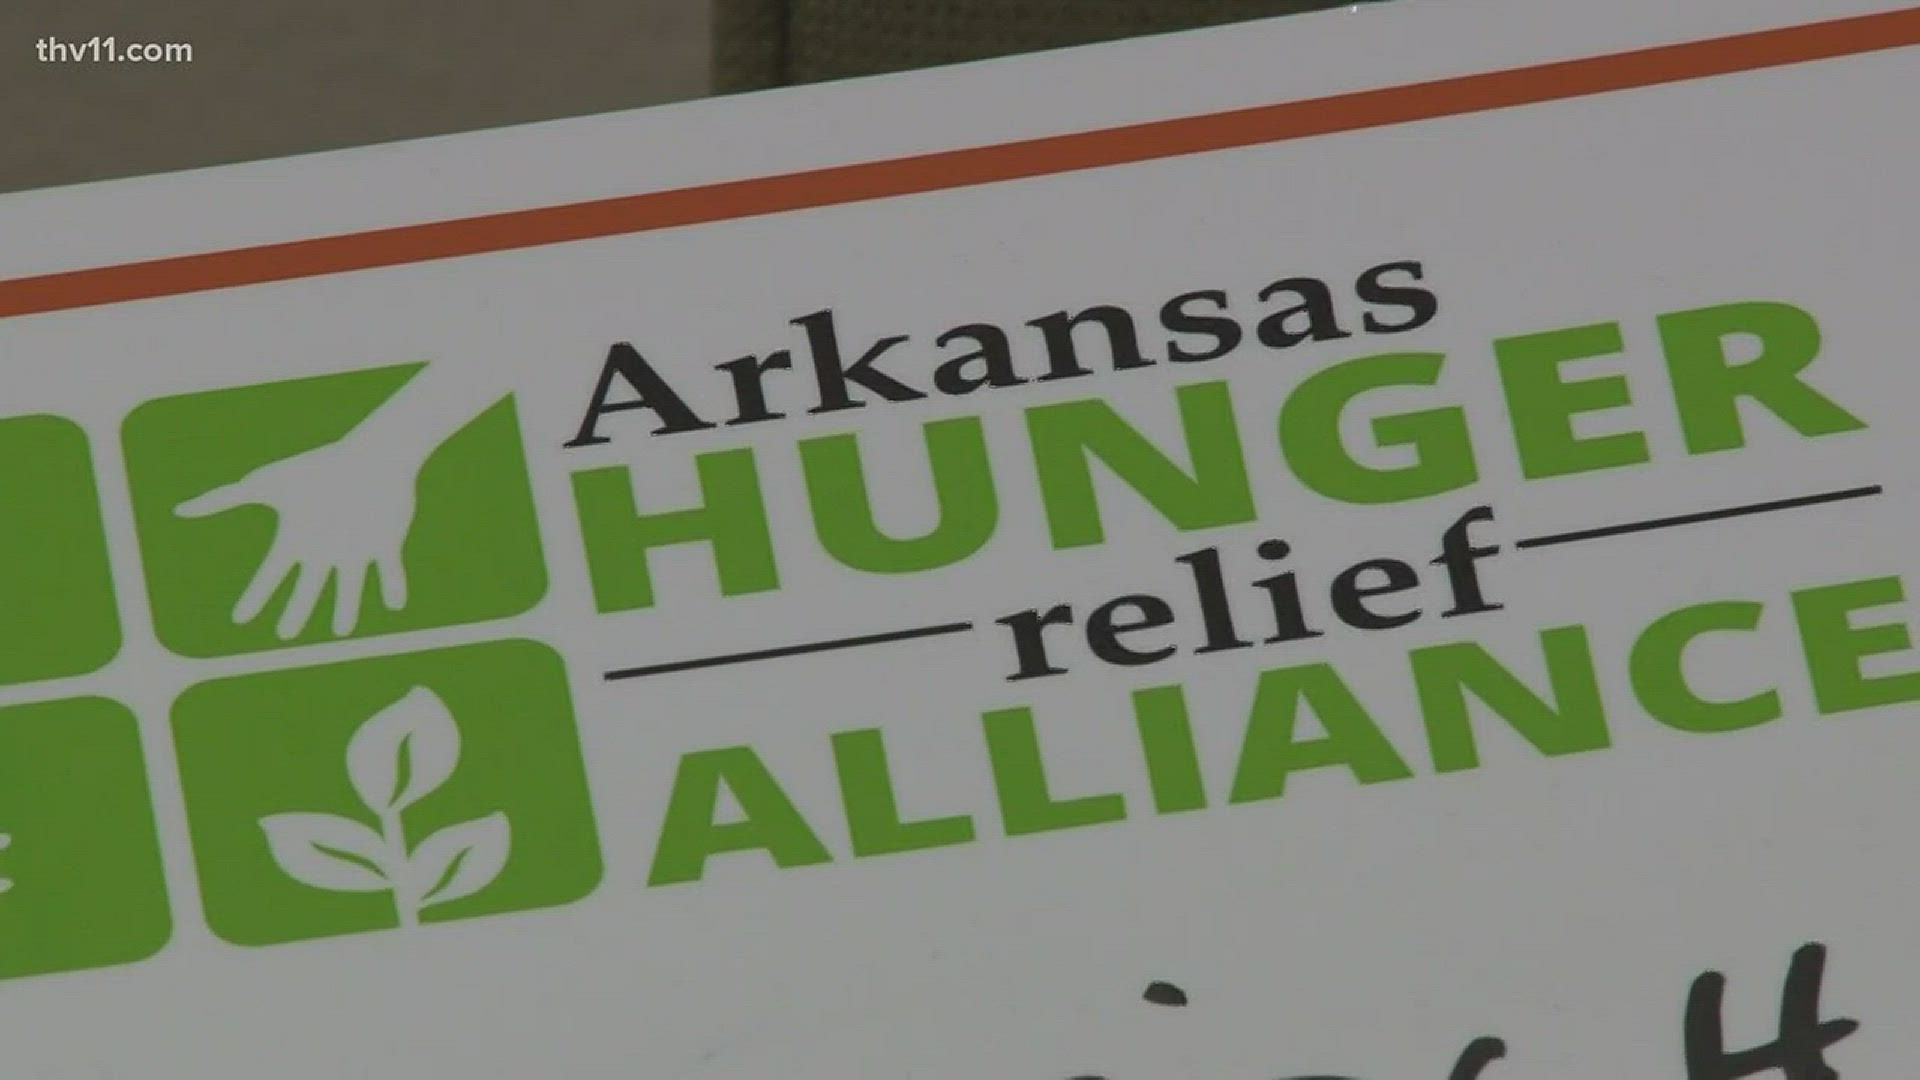 President Trump's latest budget proposal eliminates SNAP and CSFP, two programs that help food pantries feed hungry Arkansans.